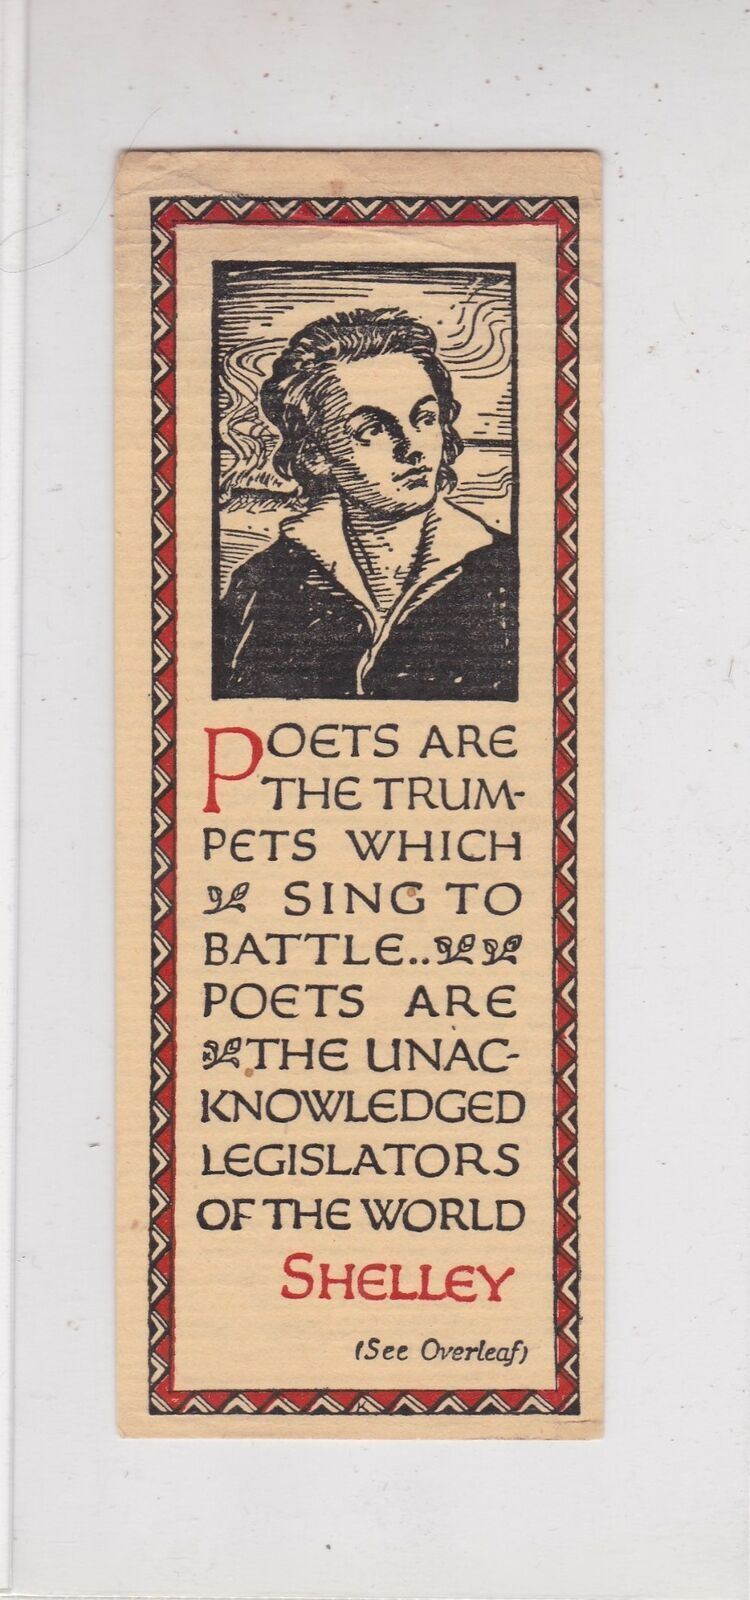 EVERYMAN\'S LIBRARY Poets are the trumpets Shelley Illustrated Book Mark Rf 46769